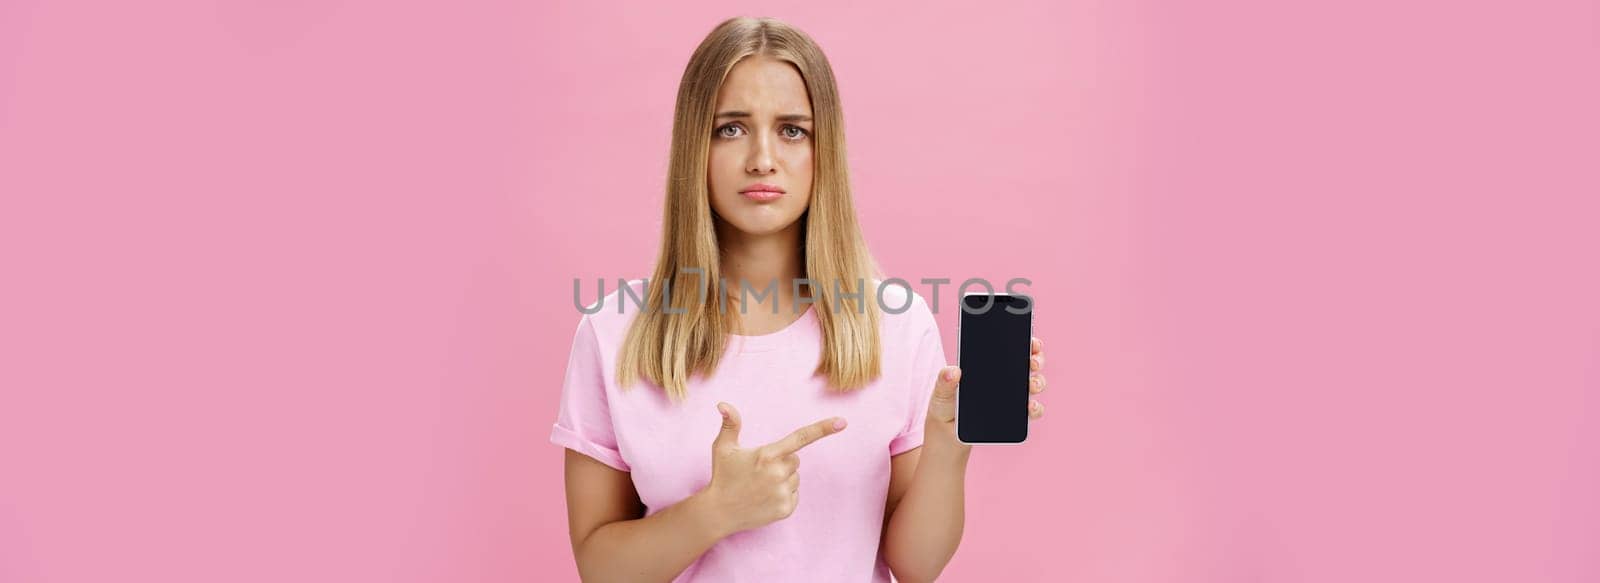 Gloomy and sad cute young female showing friend negative feedback about her project in internet pointing at smartphone screen standing concerned and upset against pink background. Technology and emotions concept